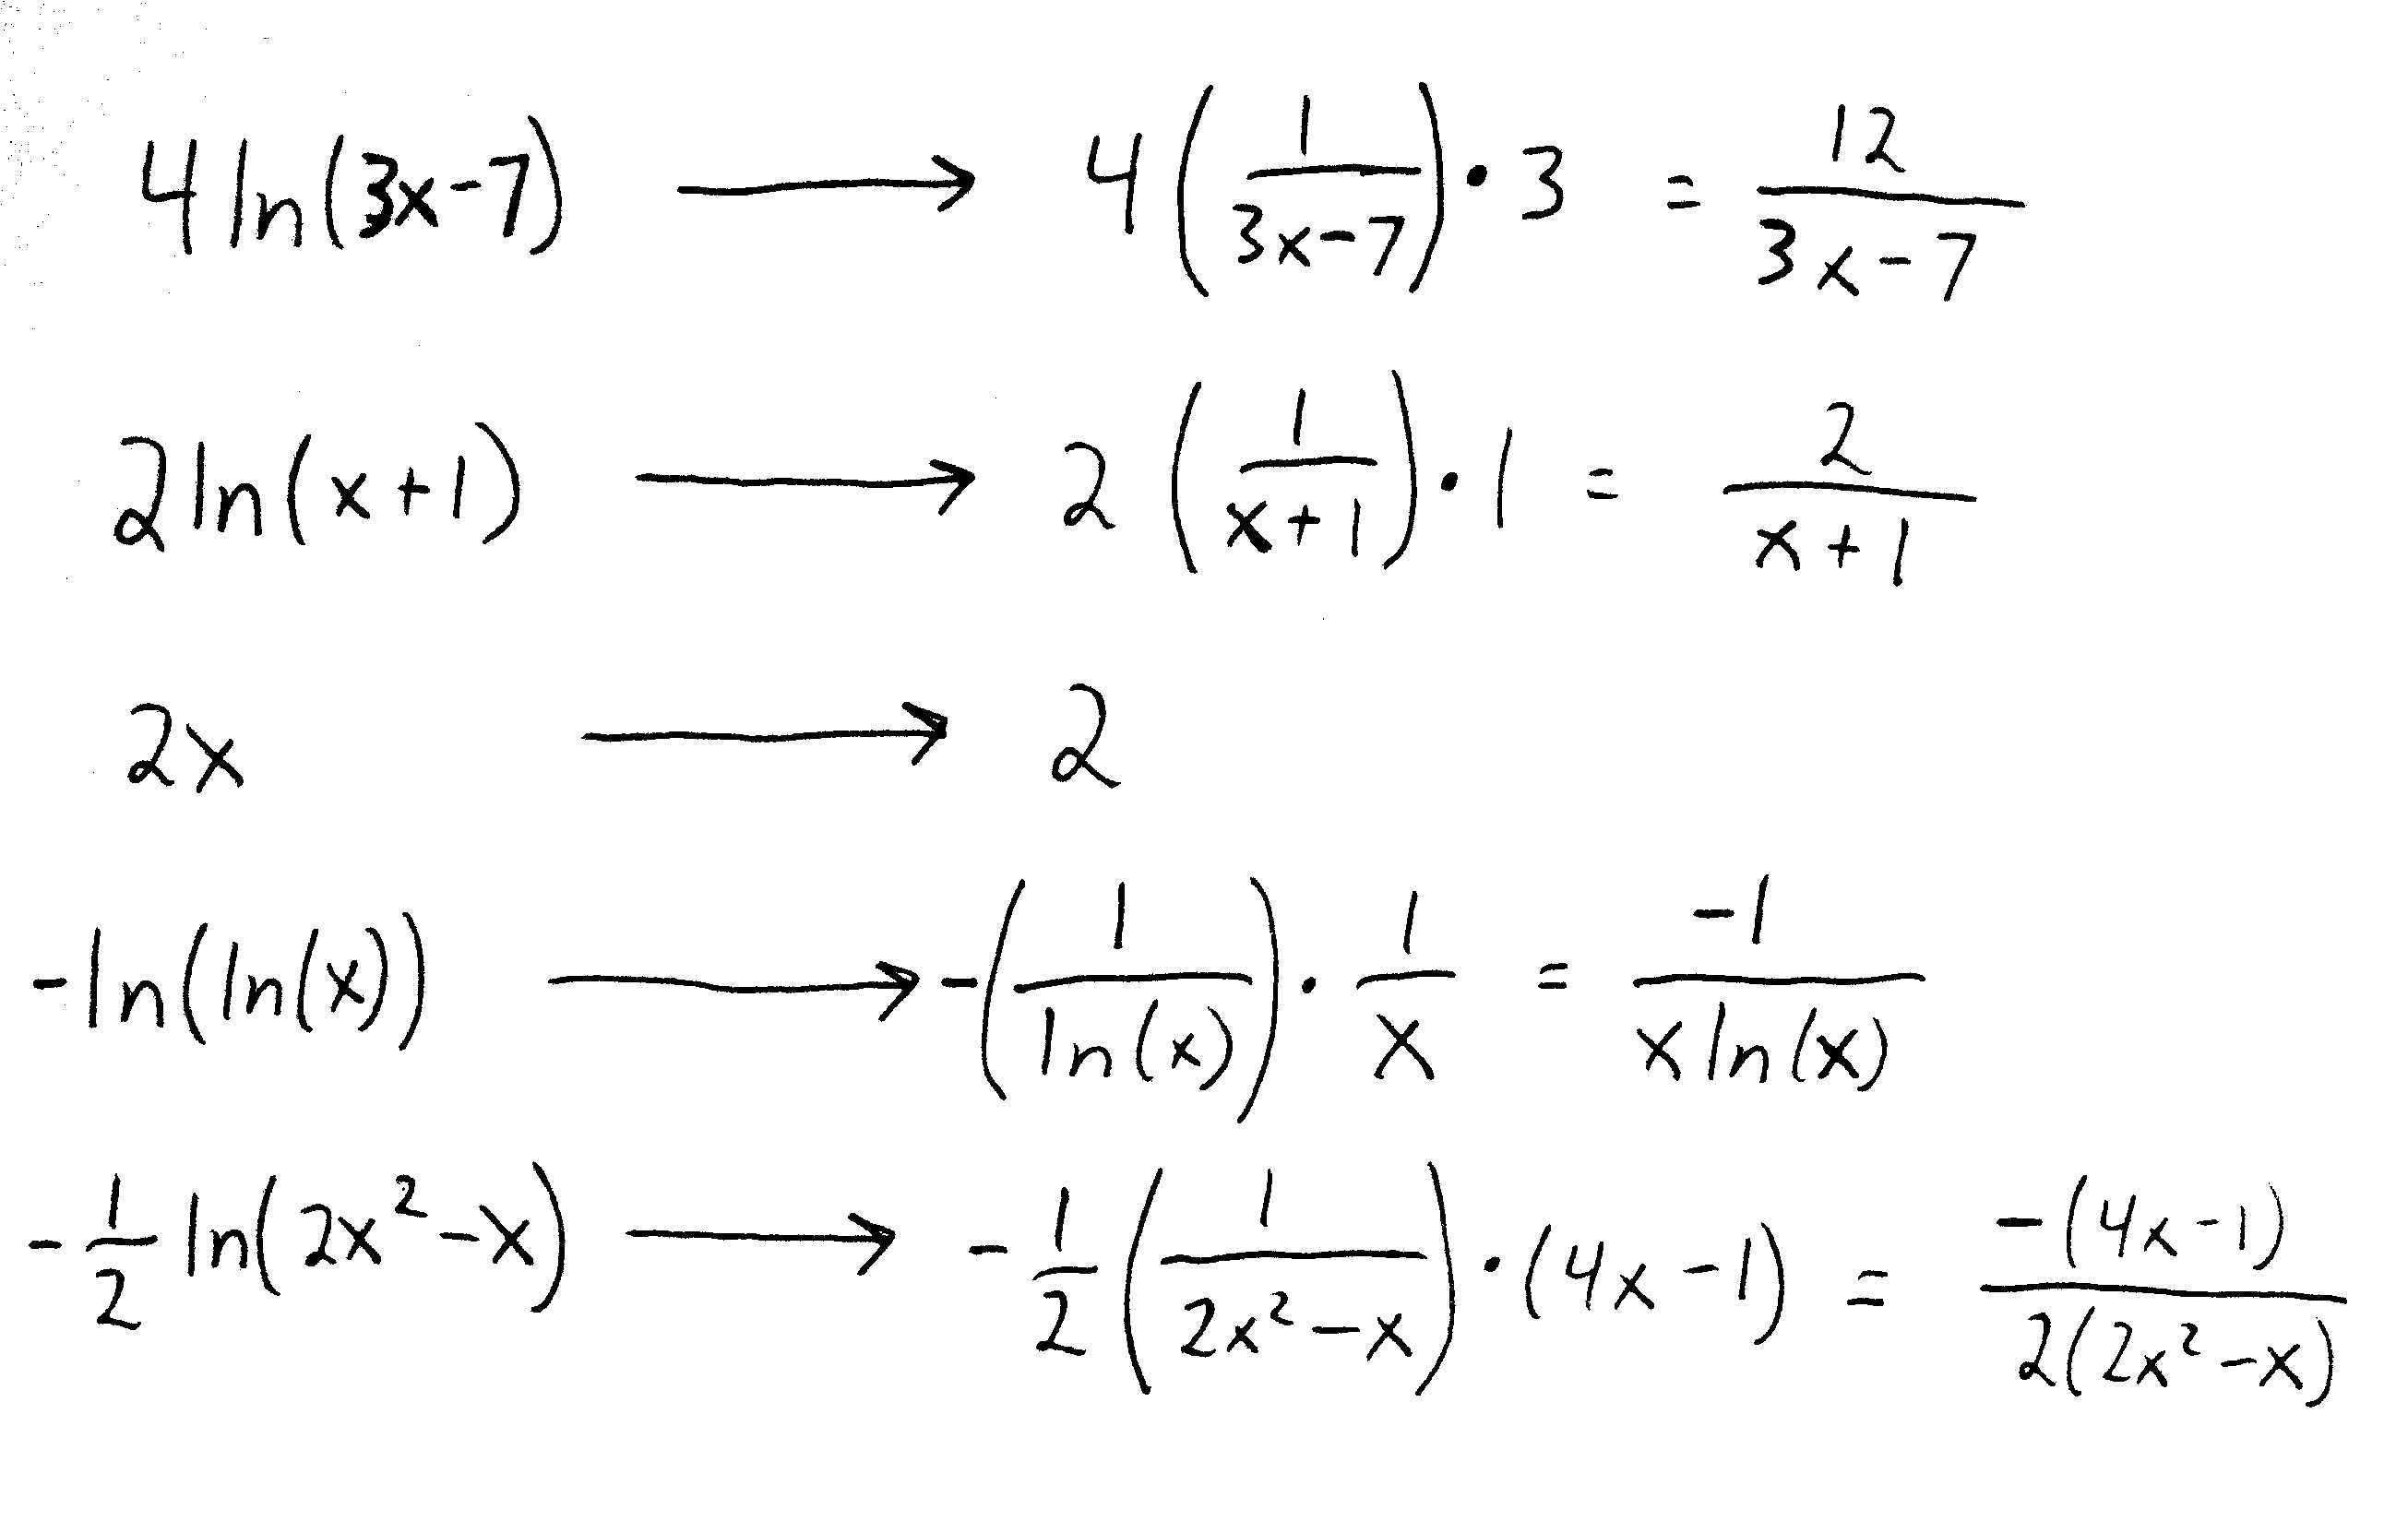 logarithmic differentiation